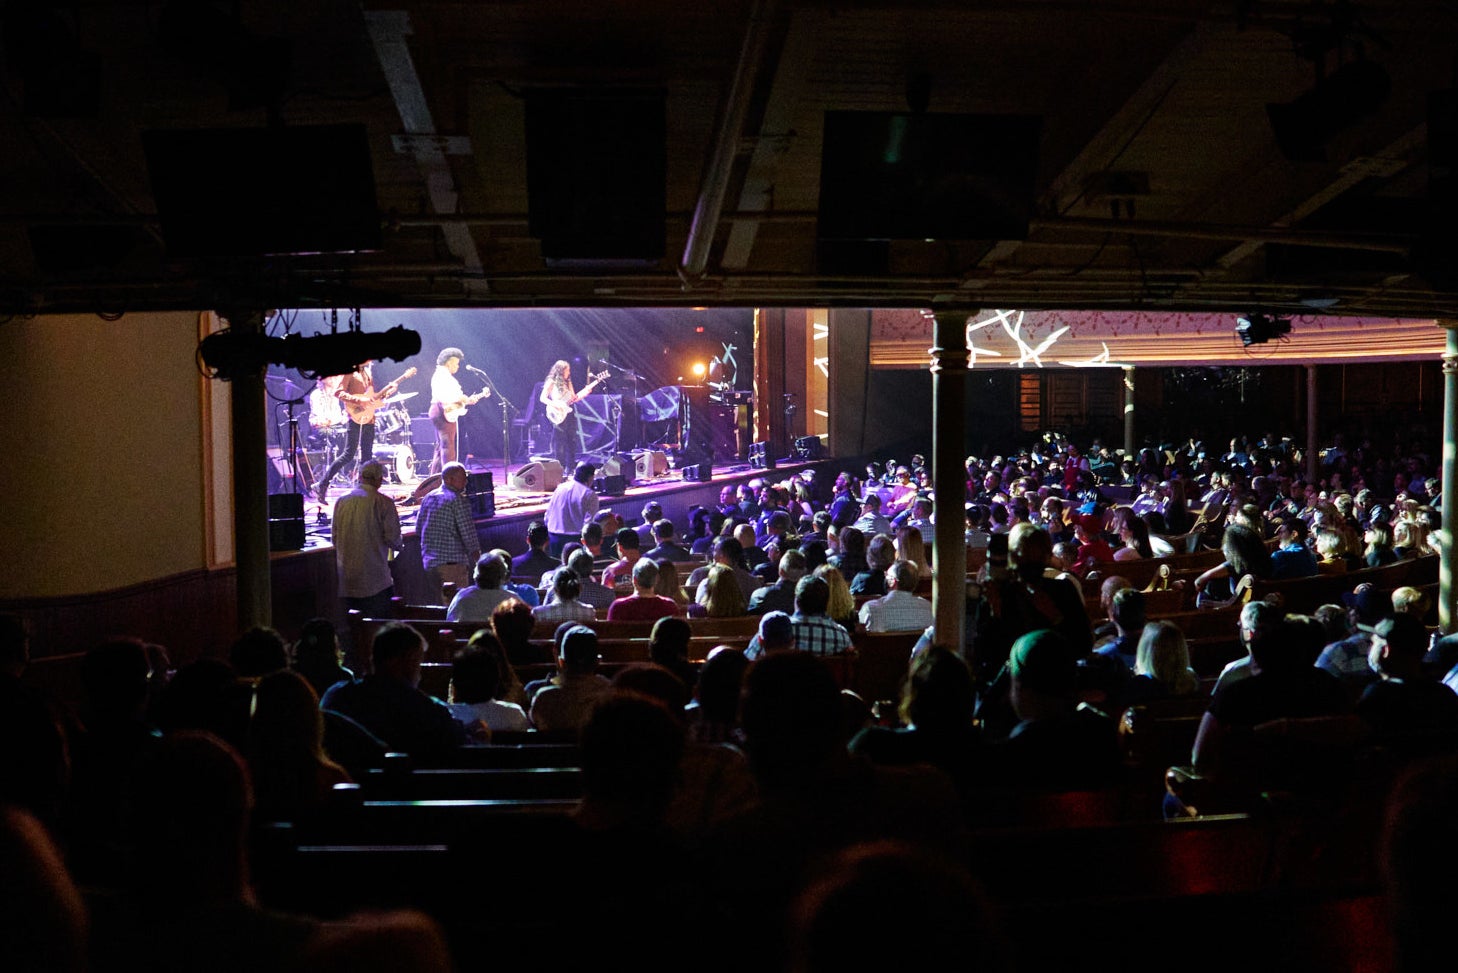 A packed crowd standing in pews watches a band perform onstage